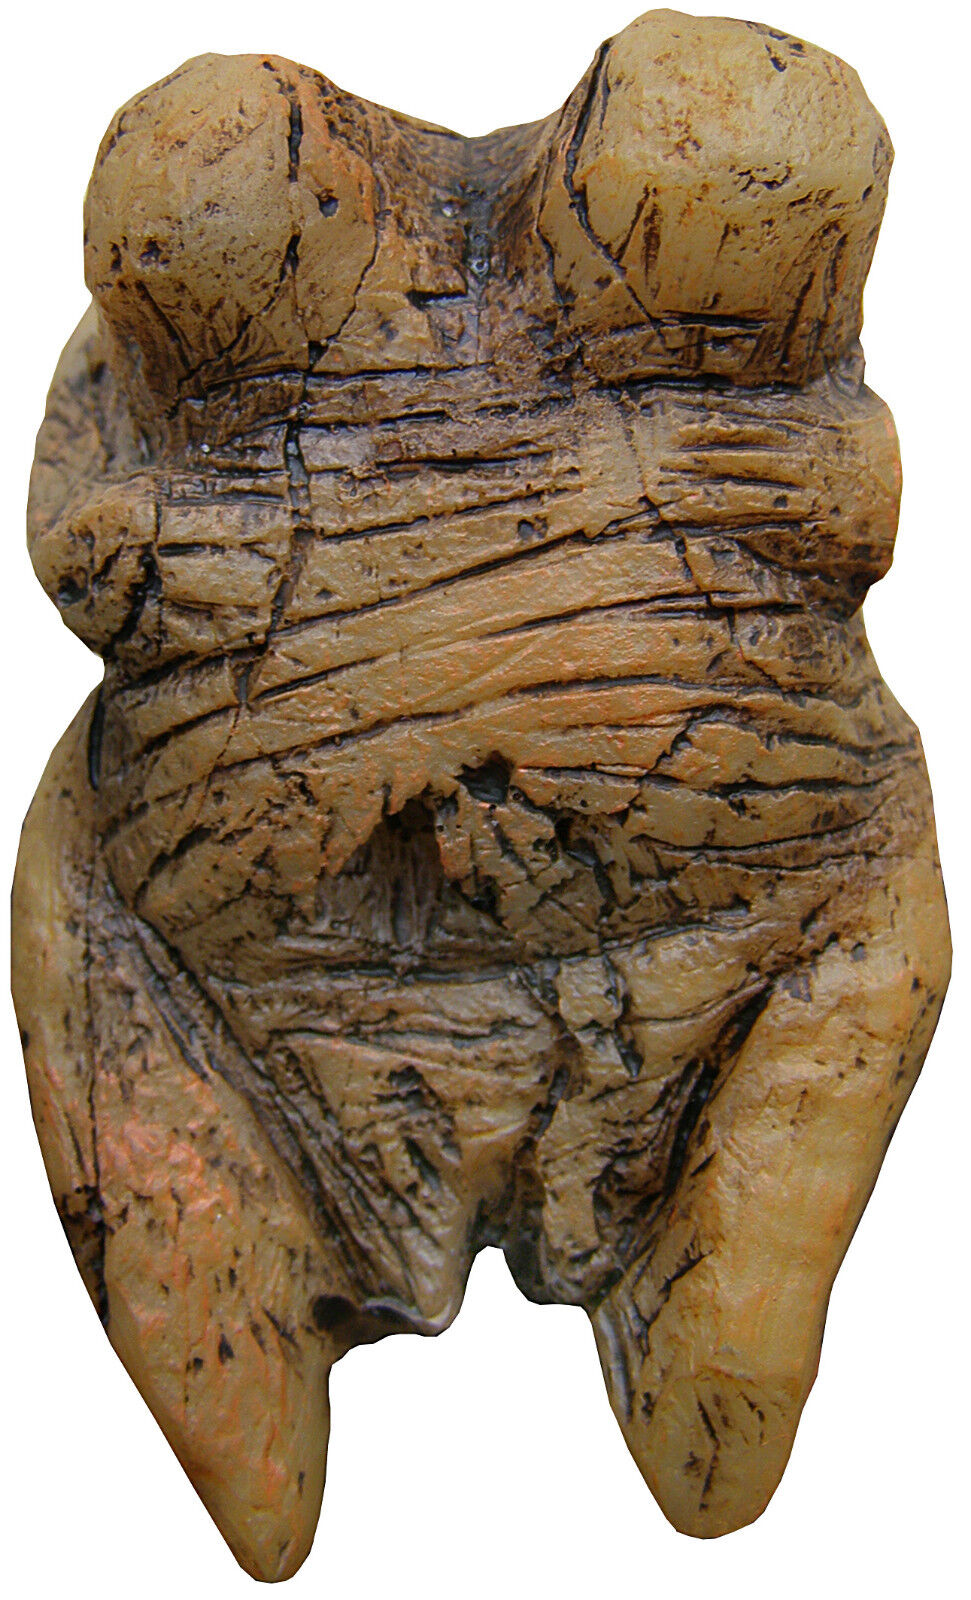 Venus from Hohle Fels cave (Germany) without pedestal - cast of resin